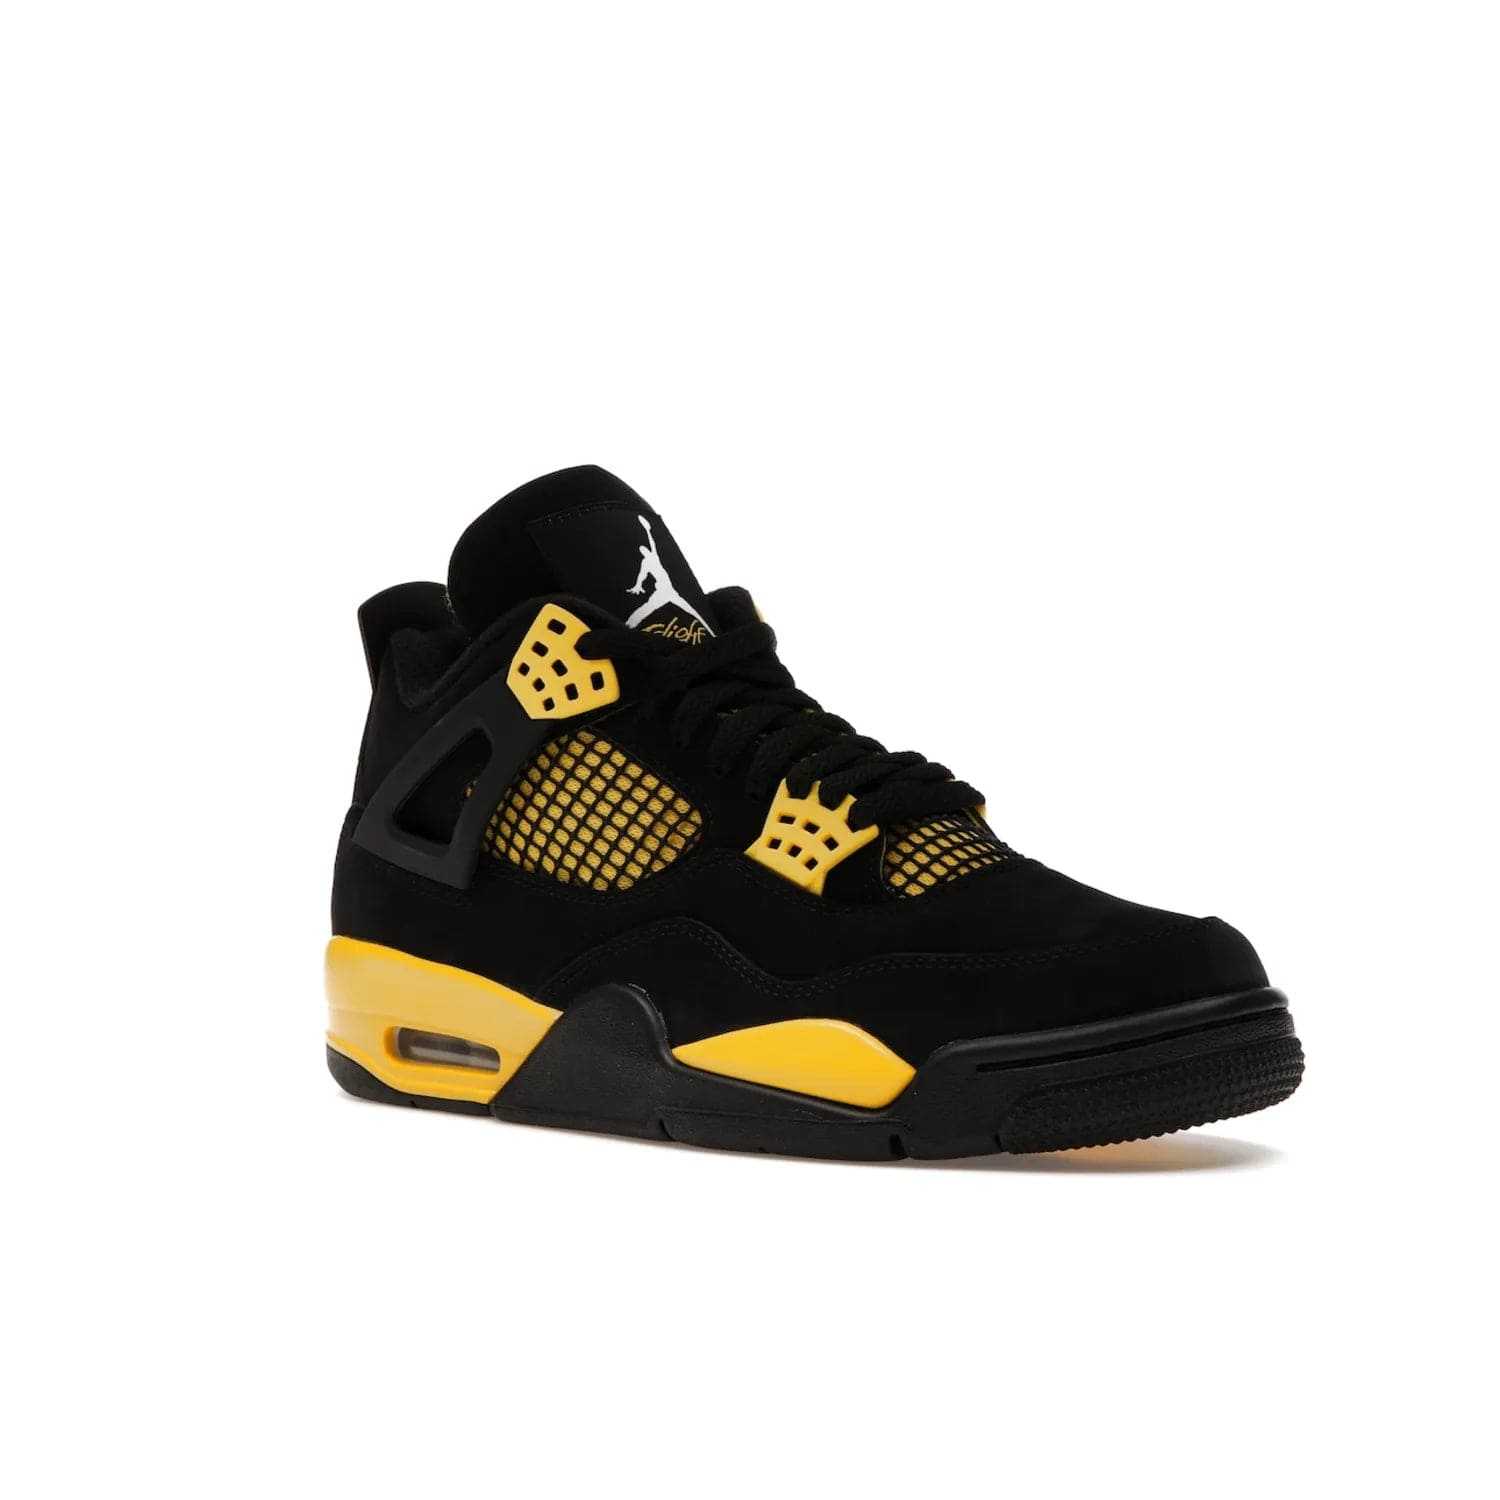 Jordan 4 Retro Thunder (2023) - Image 5 - Only at www.BallersClubKickz.com - Iconic Air Jordan 4 Retro Thunder (2023) returns with black nubuck upper and Tour Yellow details. Featuring Jumpman logo on heel tab, tongue and insoles. Dropping May 13th, 2023.